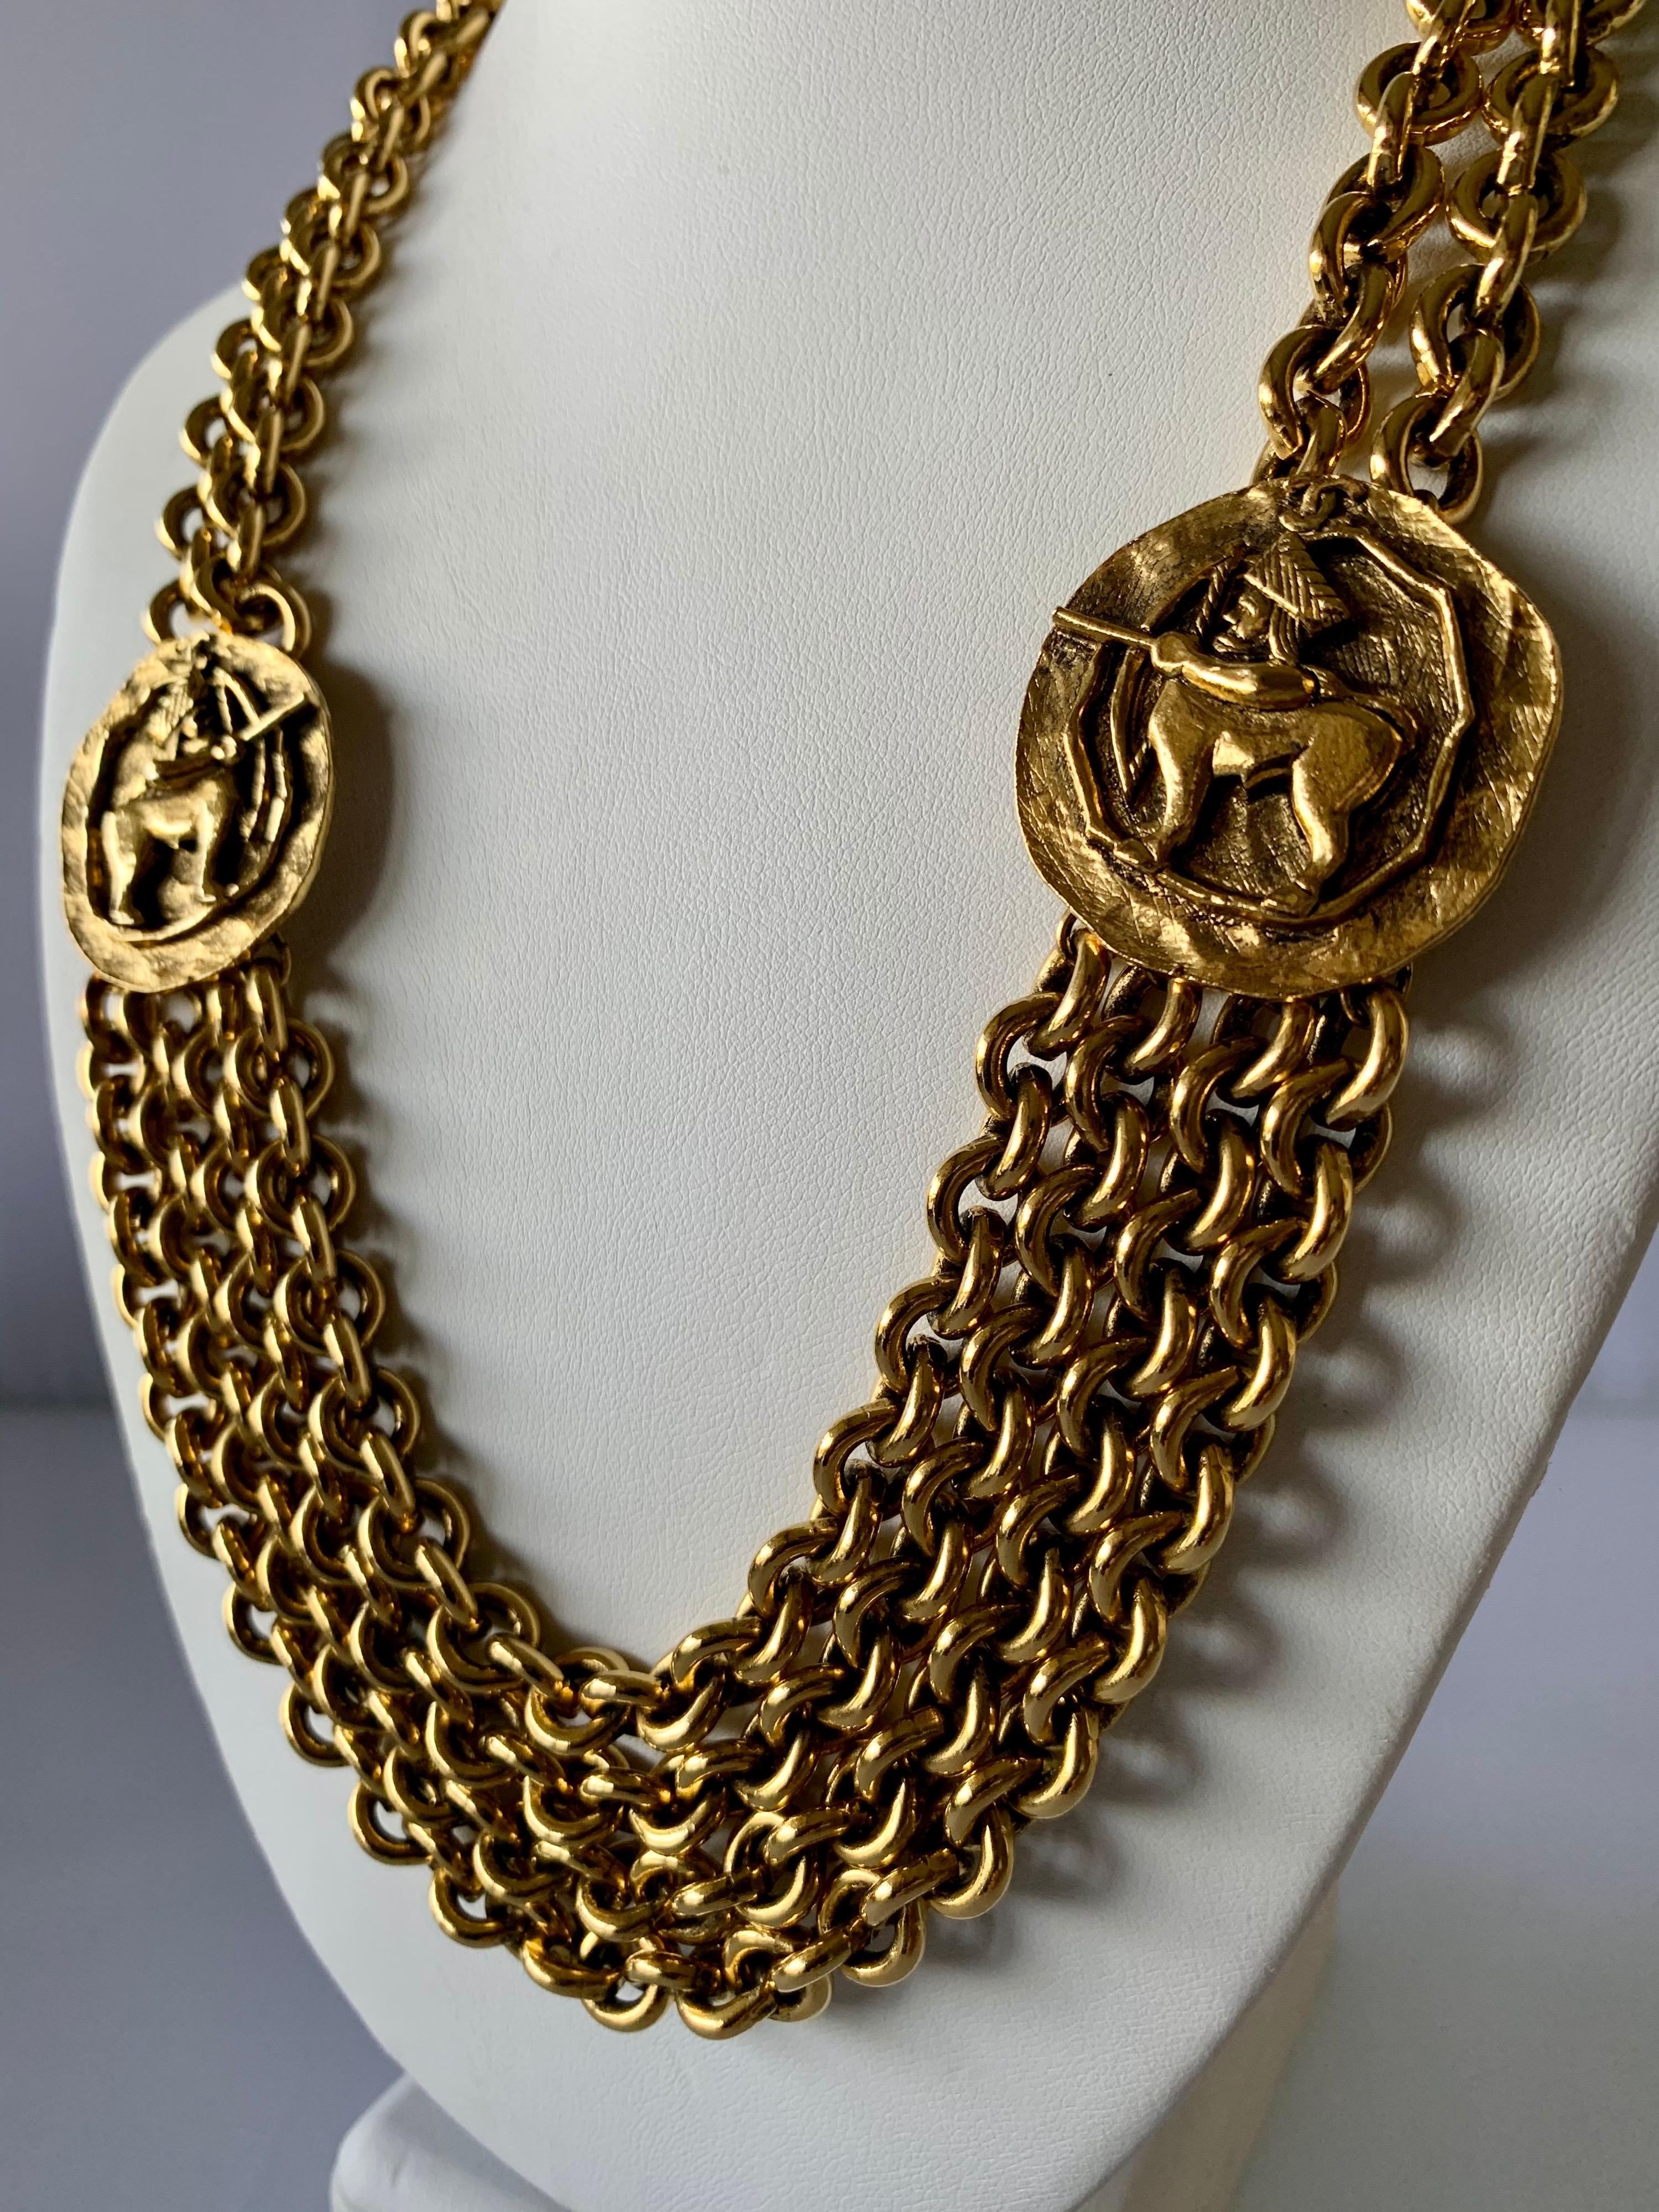 chanel inspired necklace